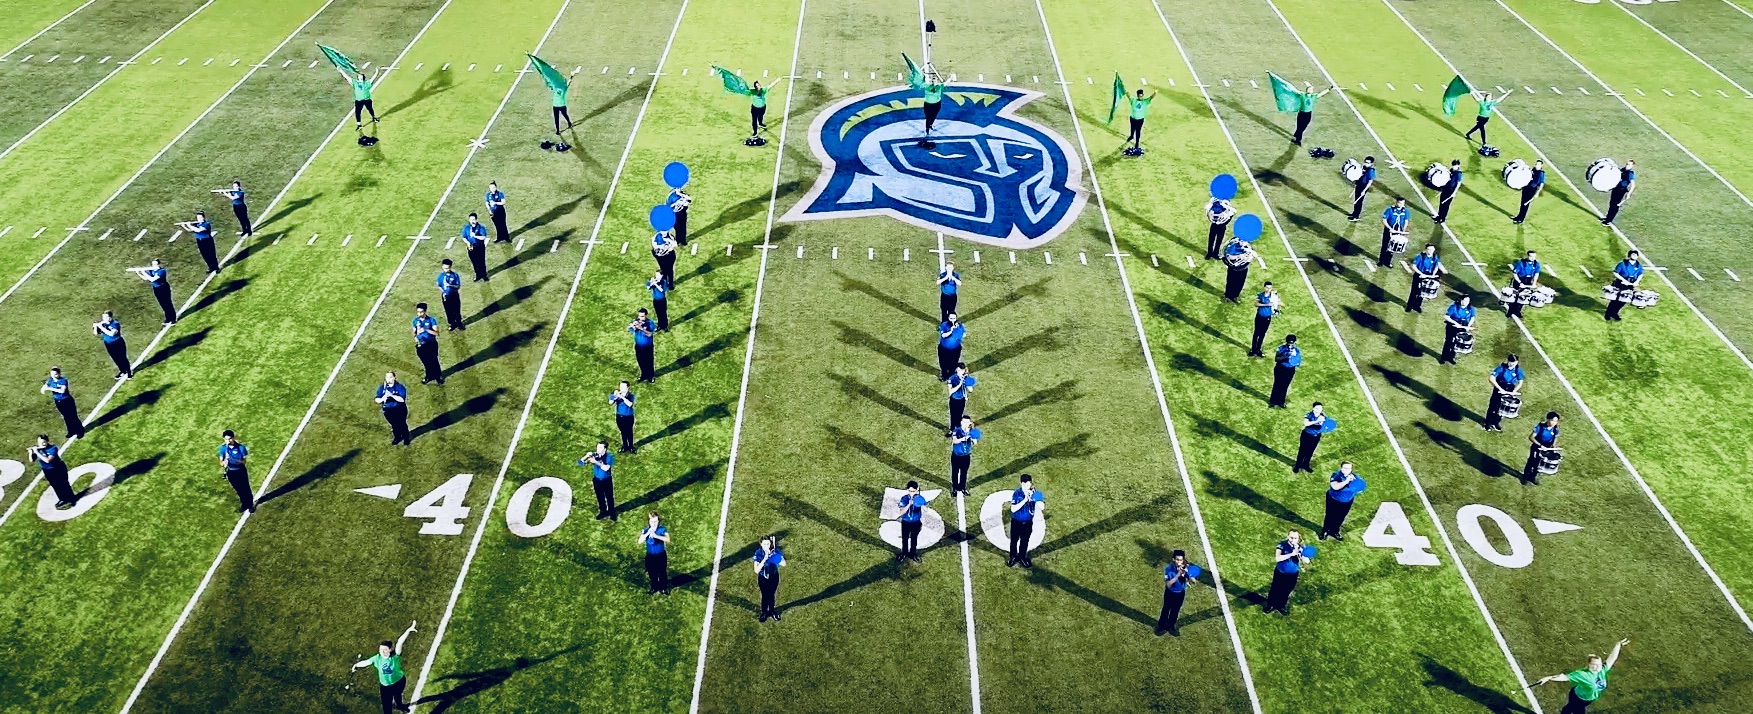 The Argo Athletic Band on field during a home game